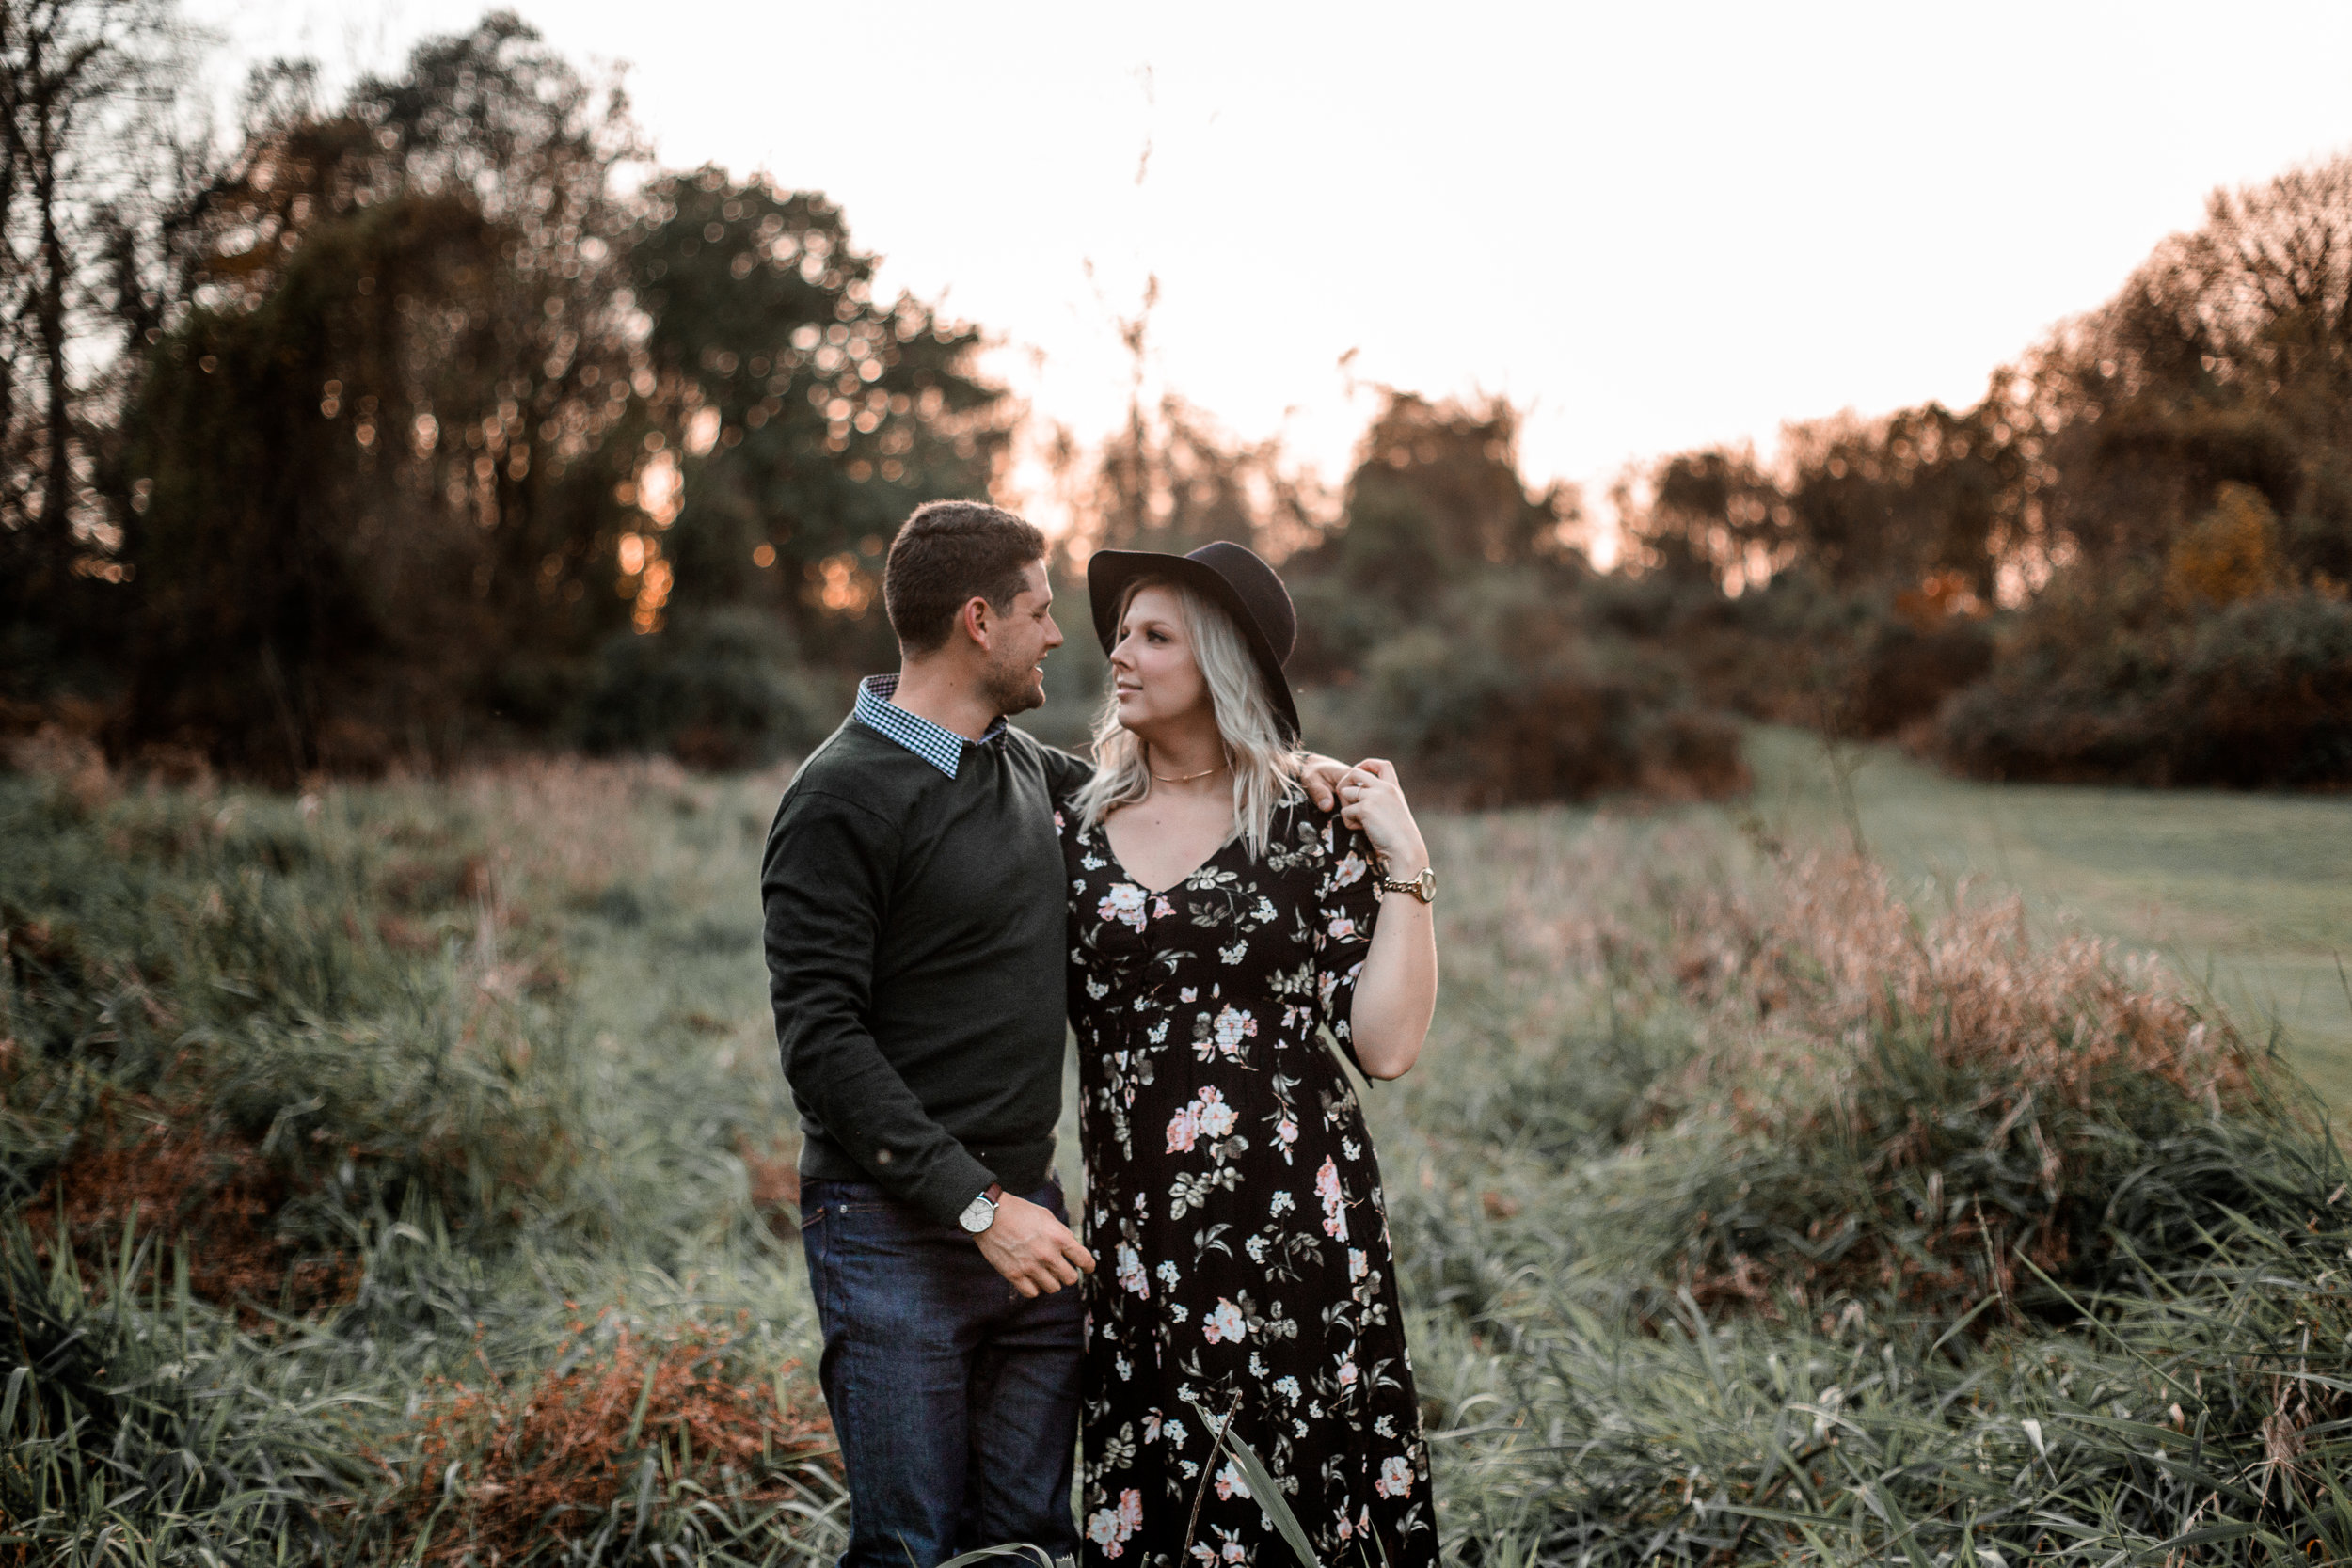 nicole-daacke-photography-carefree-bohemian-lancaster-pa-pennsylvania-engagement-photos-engagement-session-golden-sunset-adventure-session-in-lancaster-pa-lancaster-pa-outdoor-wedding-photographer-37.jpg